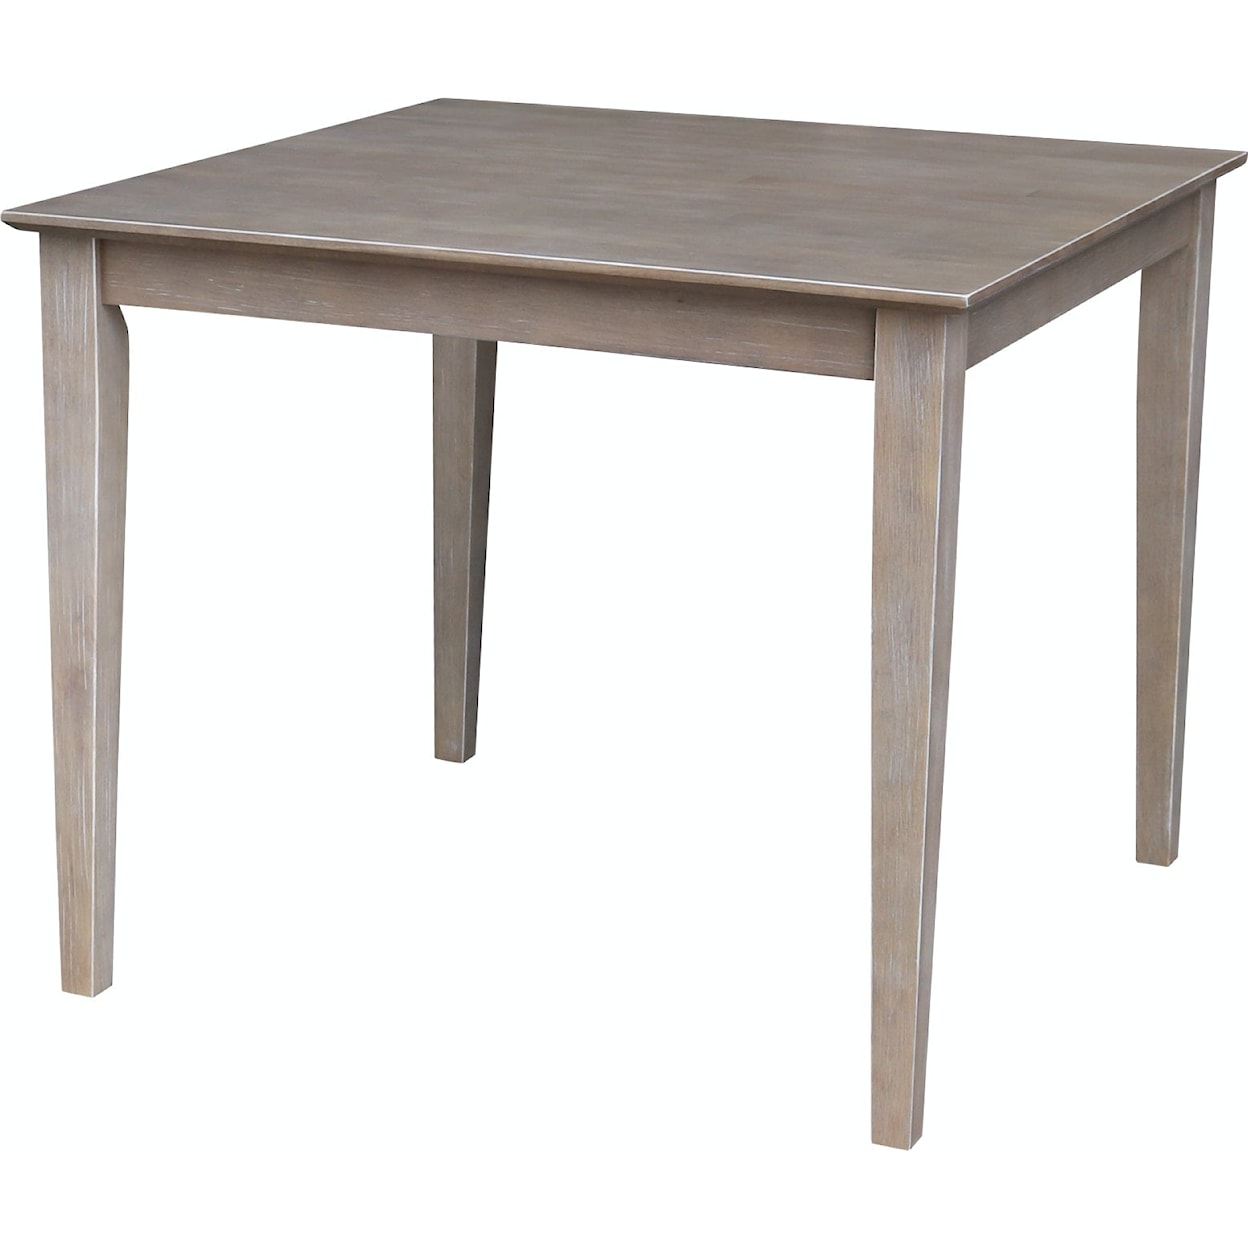 John Thomas Dining Essentials Farmhouse 36'' Square Table in Taupe Gray